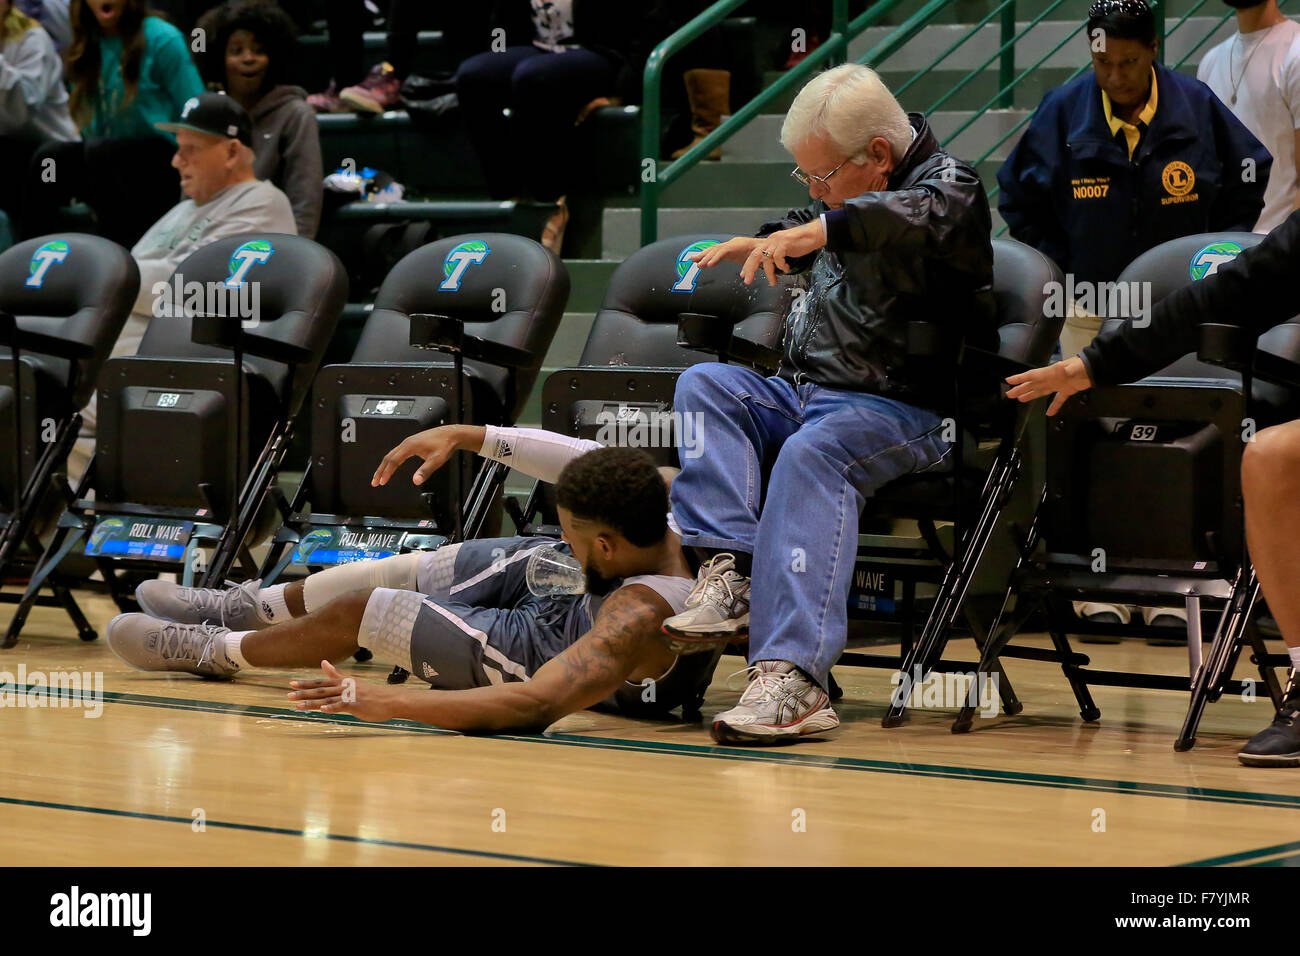 December 2, 2015: New Orleans Privateers guard Christavious Gill (5) falls into a fan courtside during the game between Tulane and the University of New Orleans at Fogelman Arena in Devlin Fieldhouse, New Orleans Louisiana © Steve Dalmado/Cal Sport Media Stock Photo